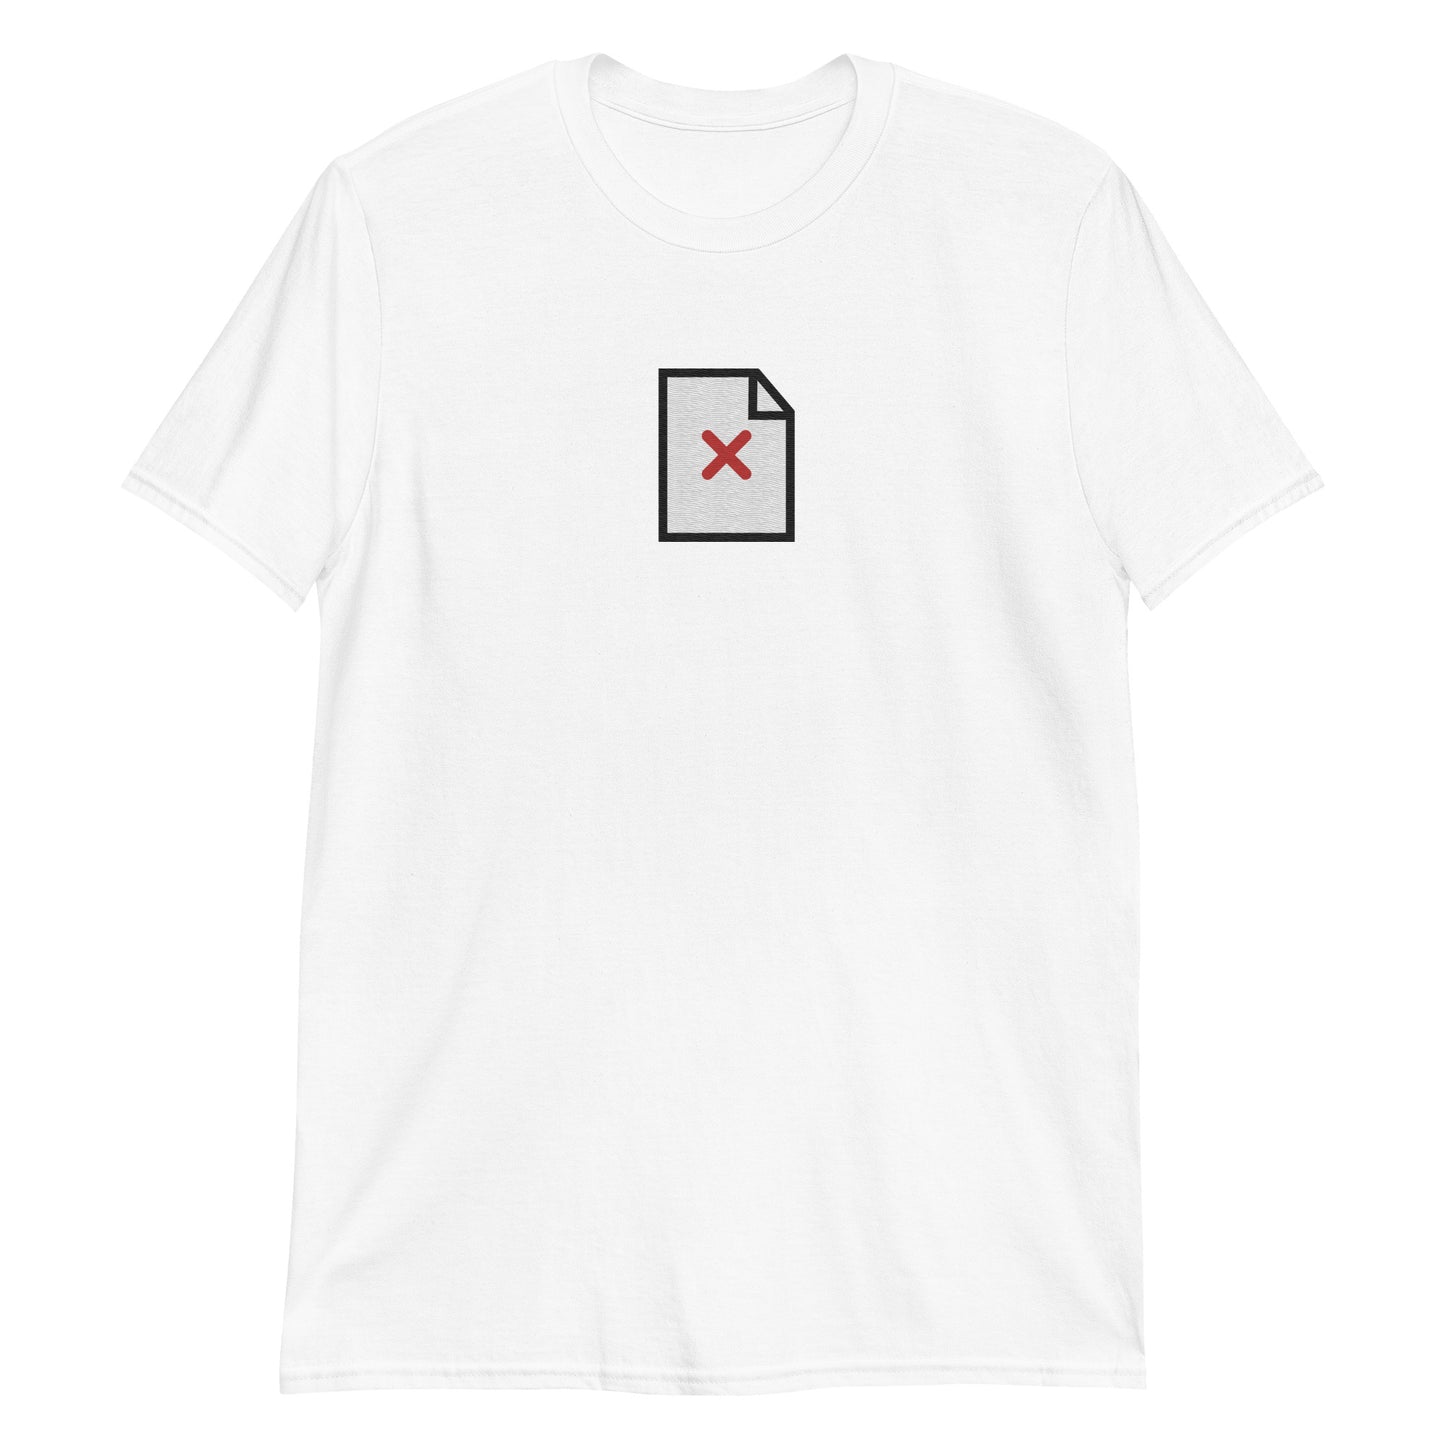 Missing Image File embroidered t-shirt